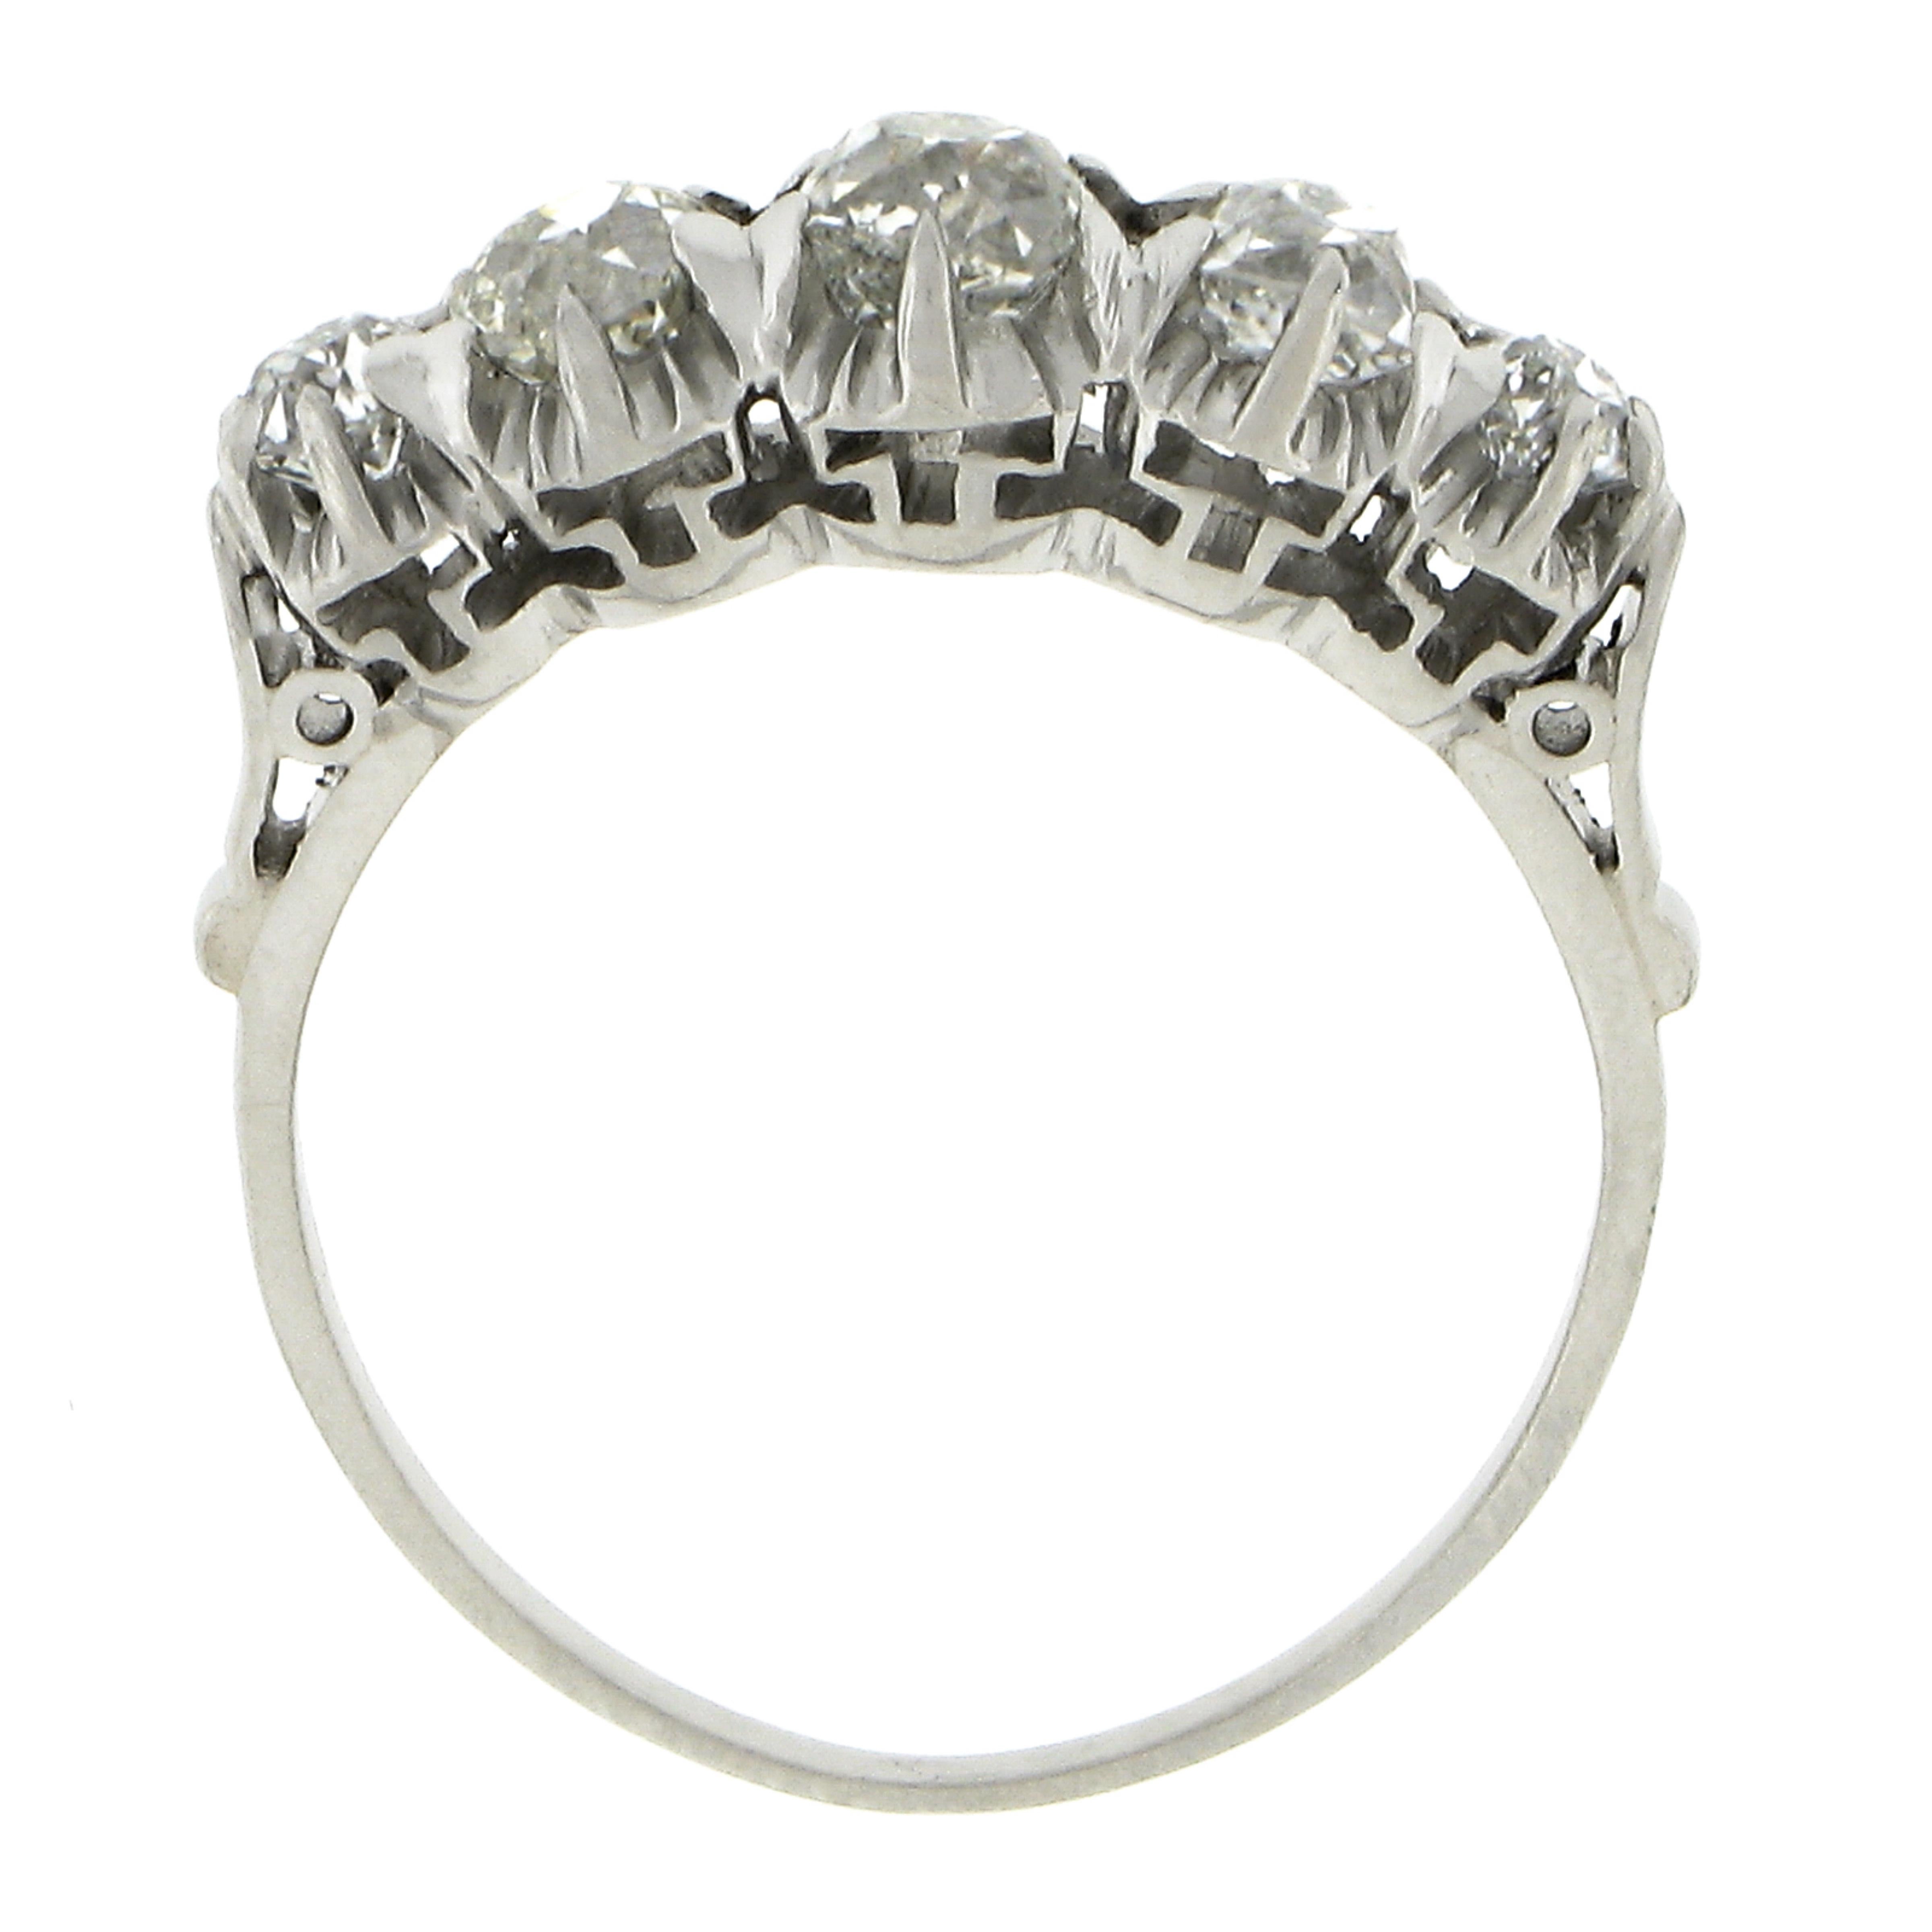 Antique Edwardian Platinum GIA Graded 1.15ct Diamond Stackable 5 Stone Band Ring For Sale 3